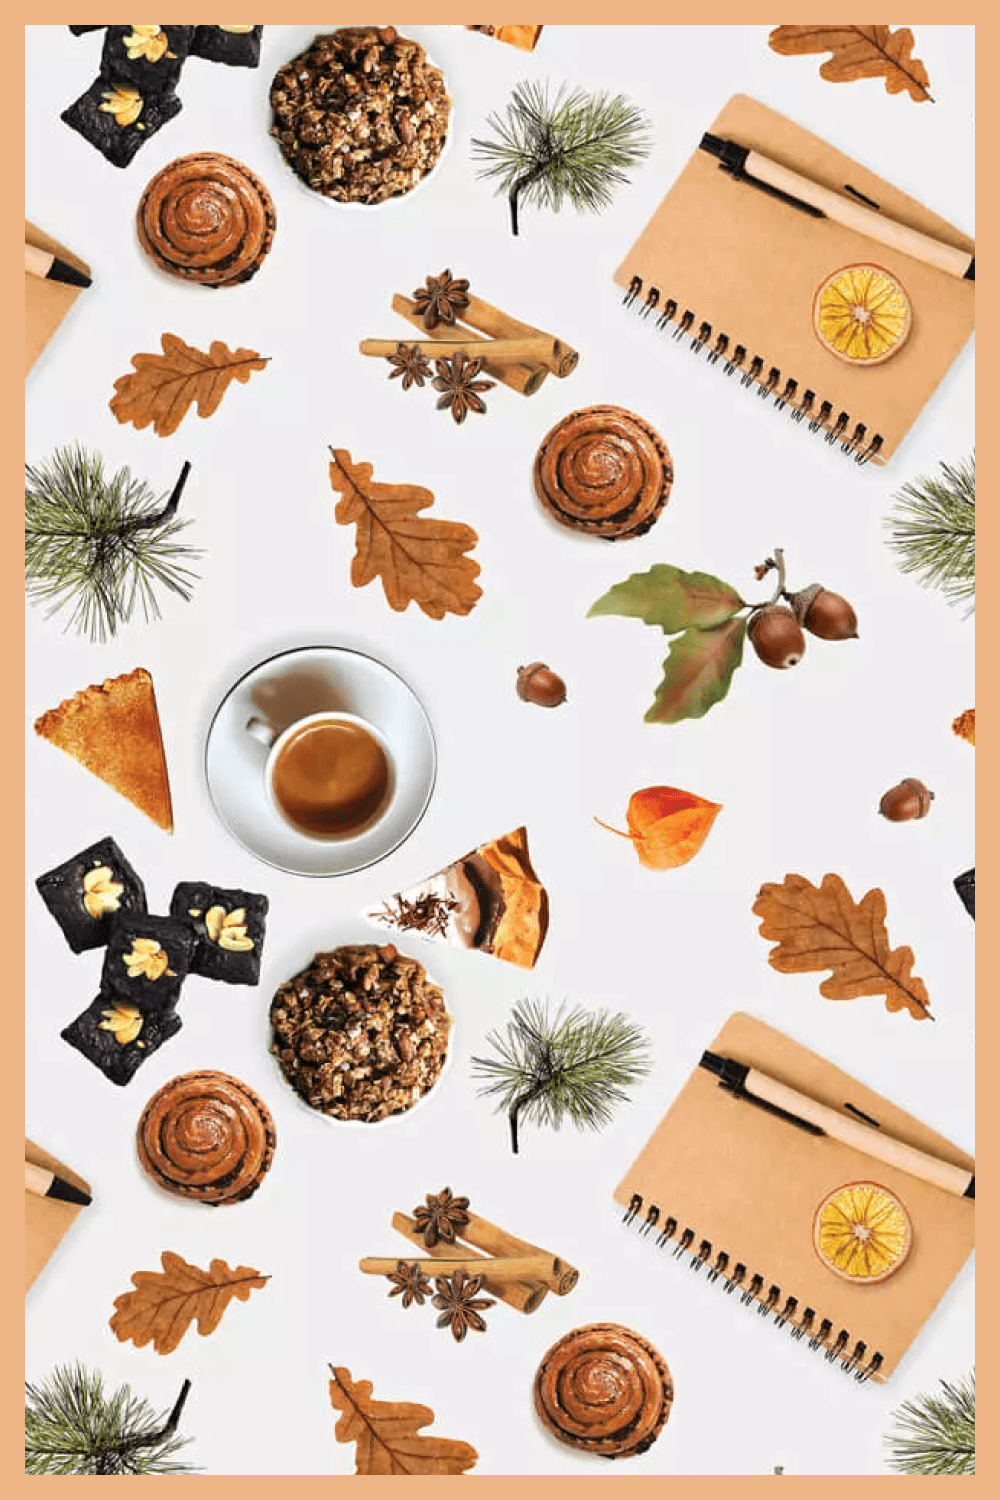 Pine twigs, coffee, notepad, oak leaves and acorns on a white background.